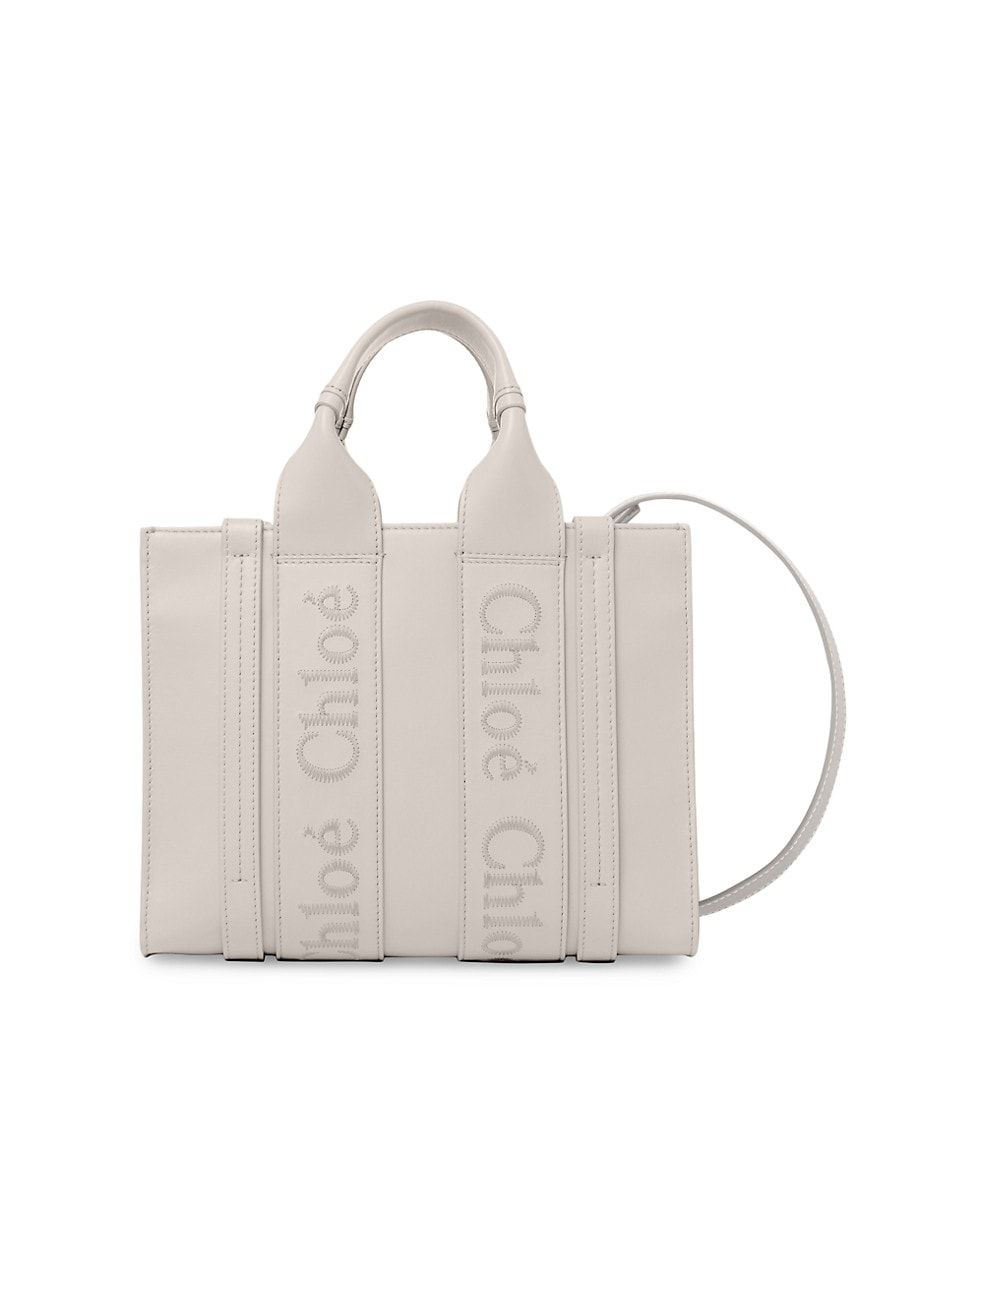 Chloé Small Woody Leather Tote Bag | Saks Fifth Avenue